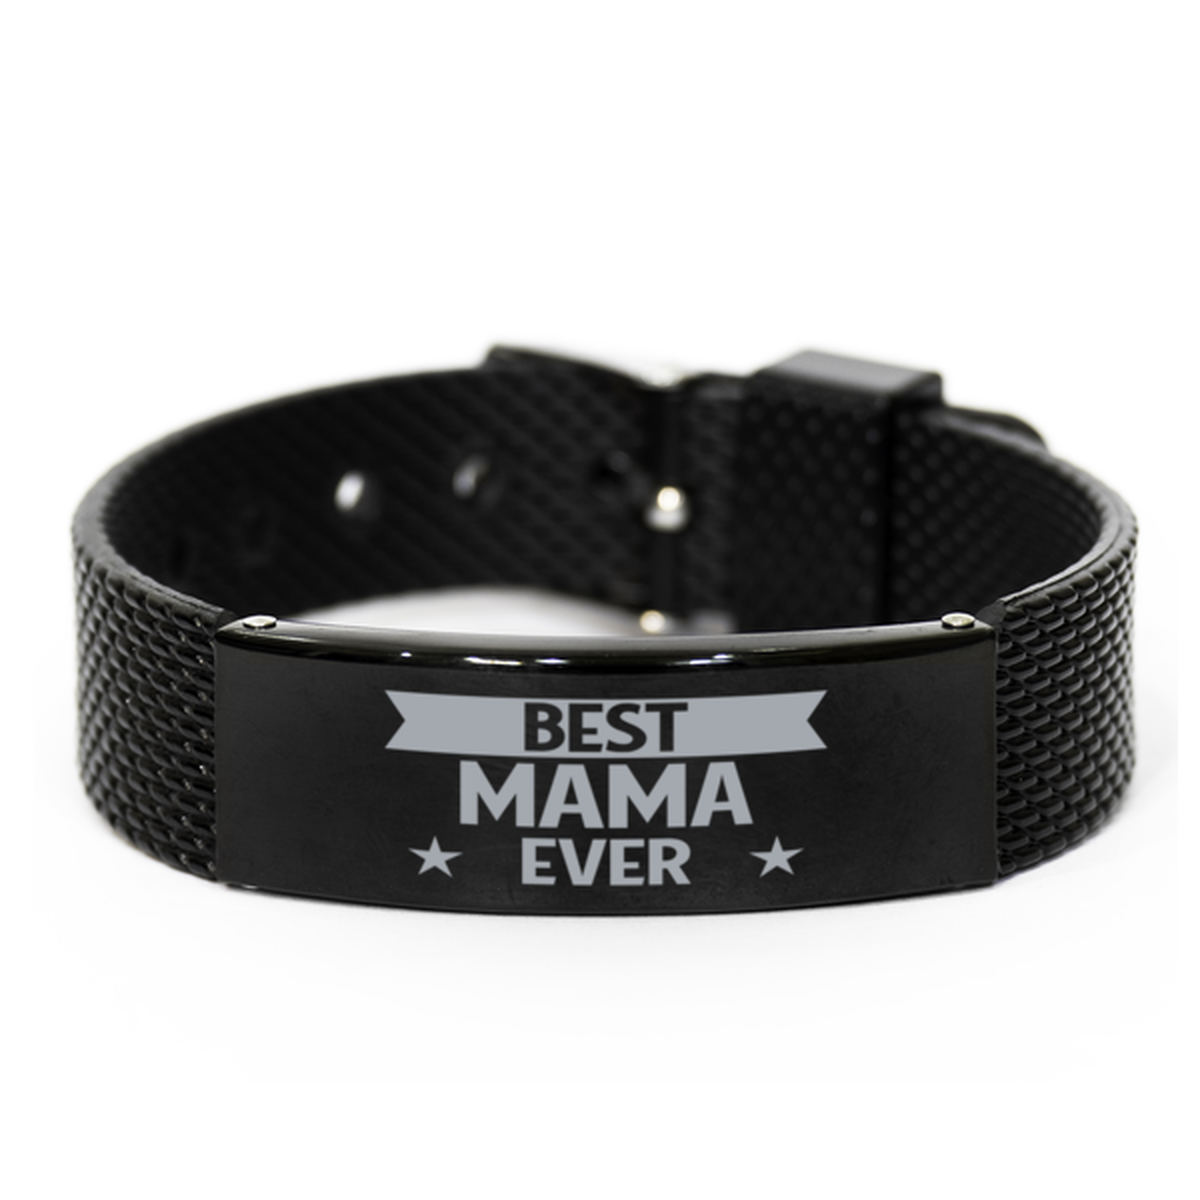 Best Mama Ever Mama Gifts, Gag Engraved Bracelet For Mama, Best Family Gifts For Women